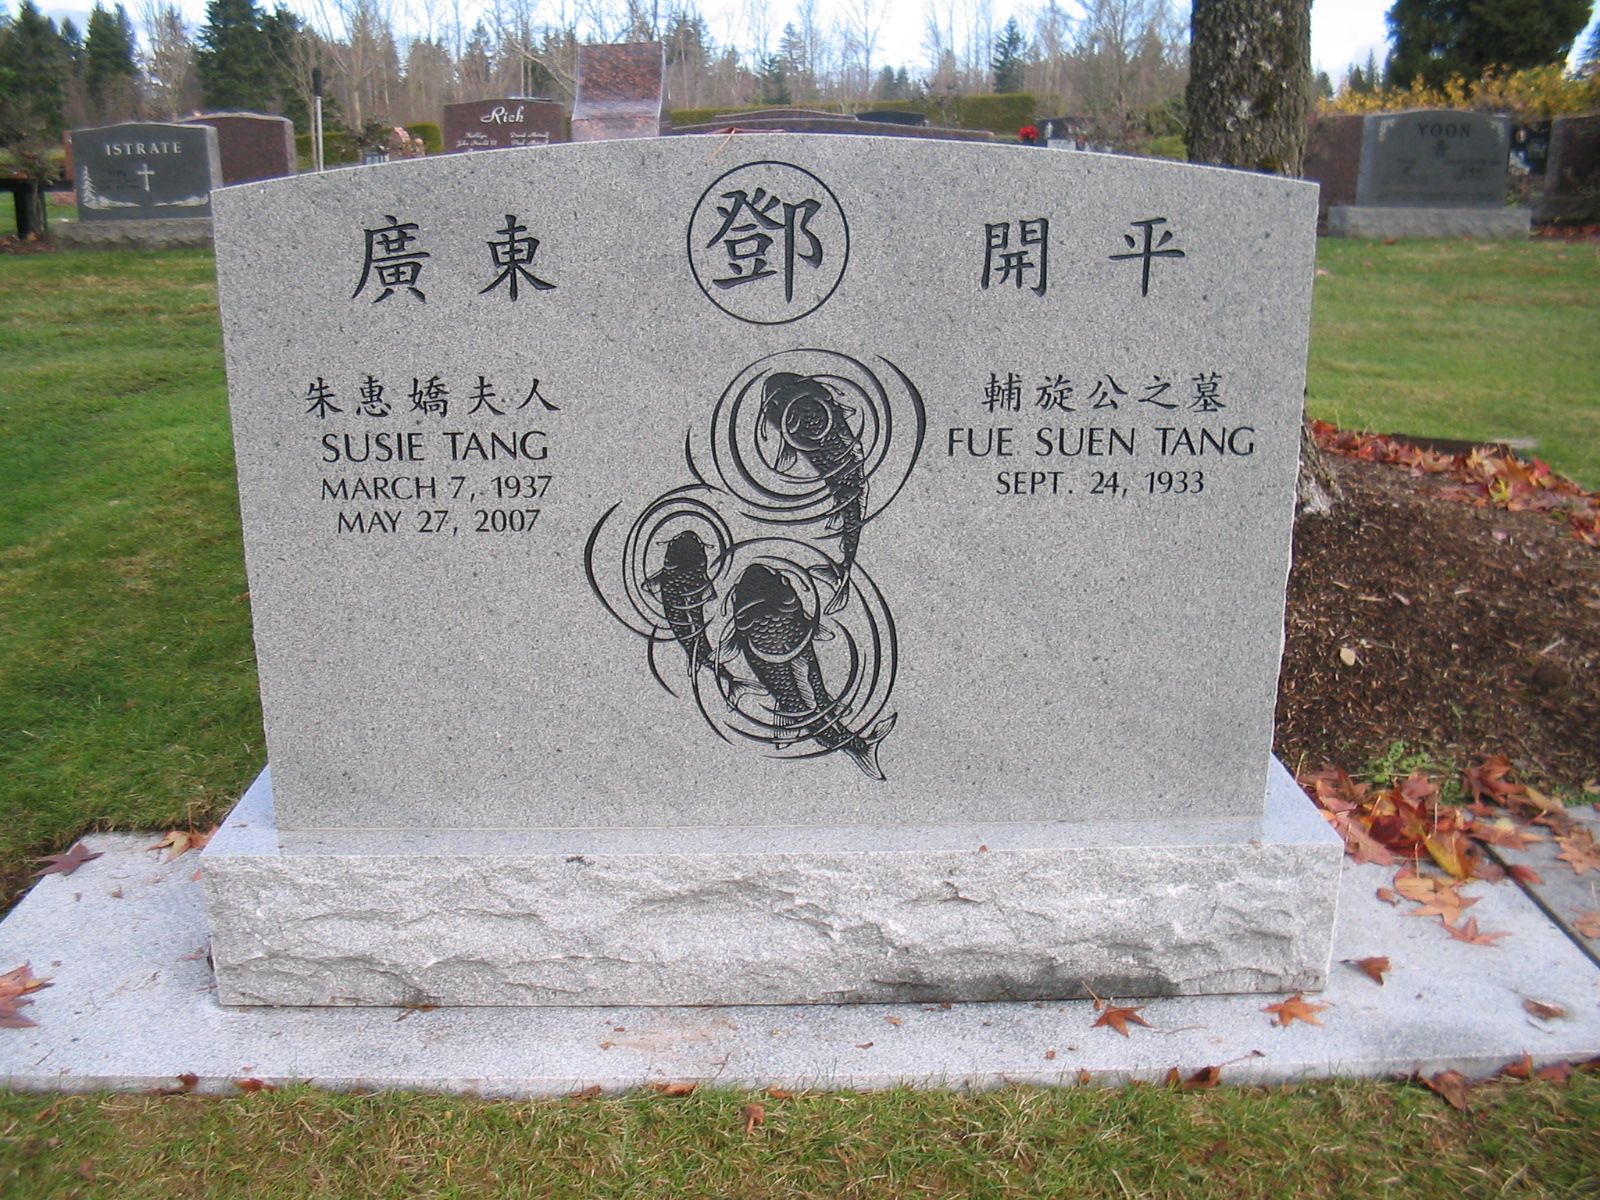 quiring-monuments-asian-granite-upright-monument-fish-design-floral-hills-cemetery-lynnwood-wa.jpeg